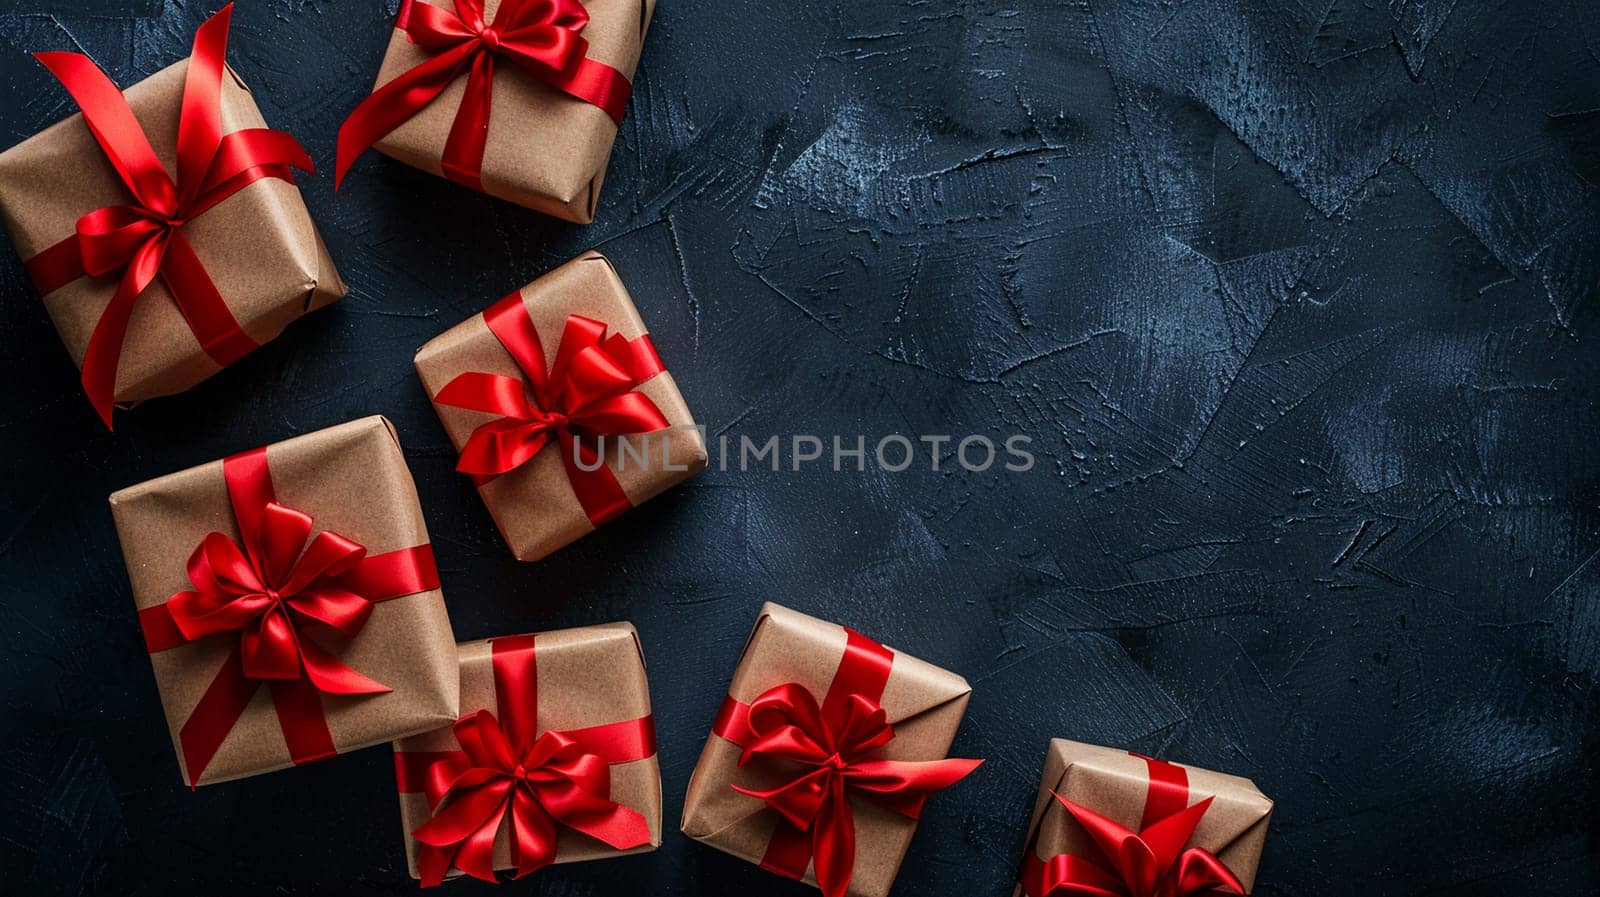 Top view of multiple brown gift boxes tied with vibrant red ribbons, arranged on a dark, textured surface, conveying luxury and celebration.